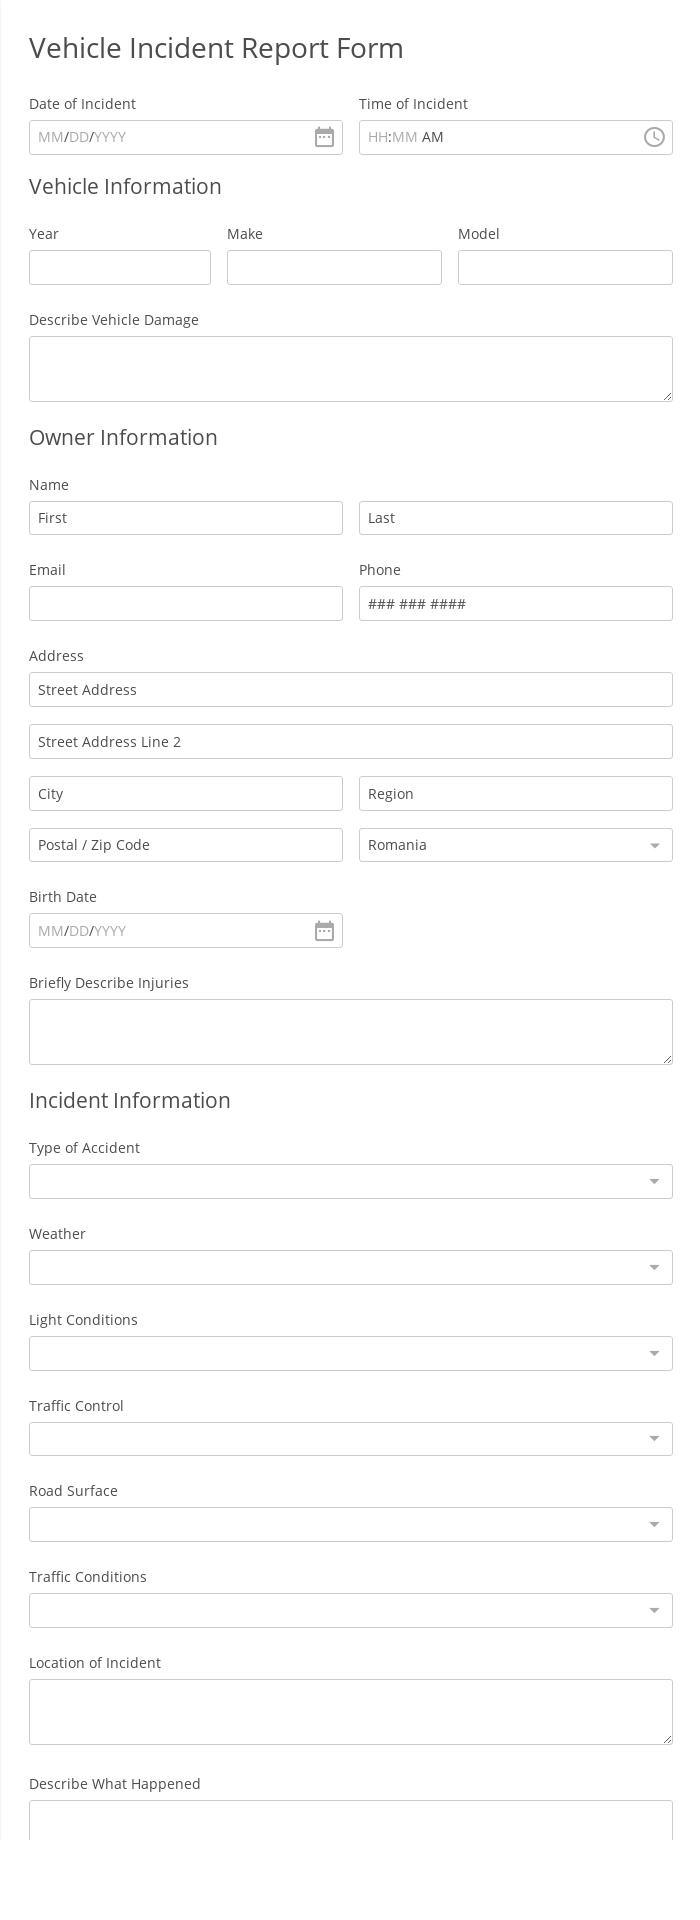 Vehicle Incident Report Form Template  24 Form Builder In Vehicle Accident Report Form Template